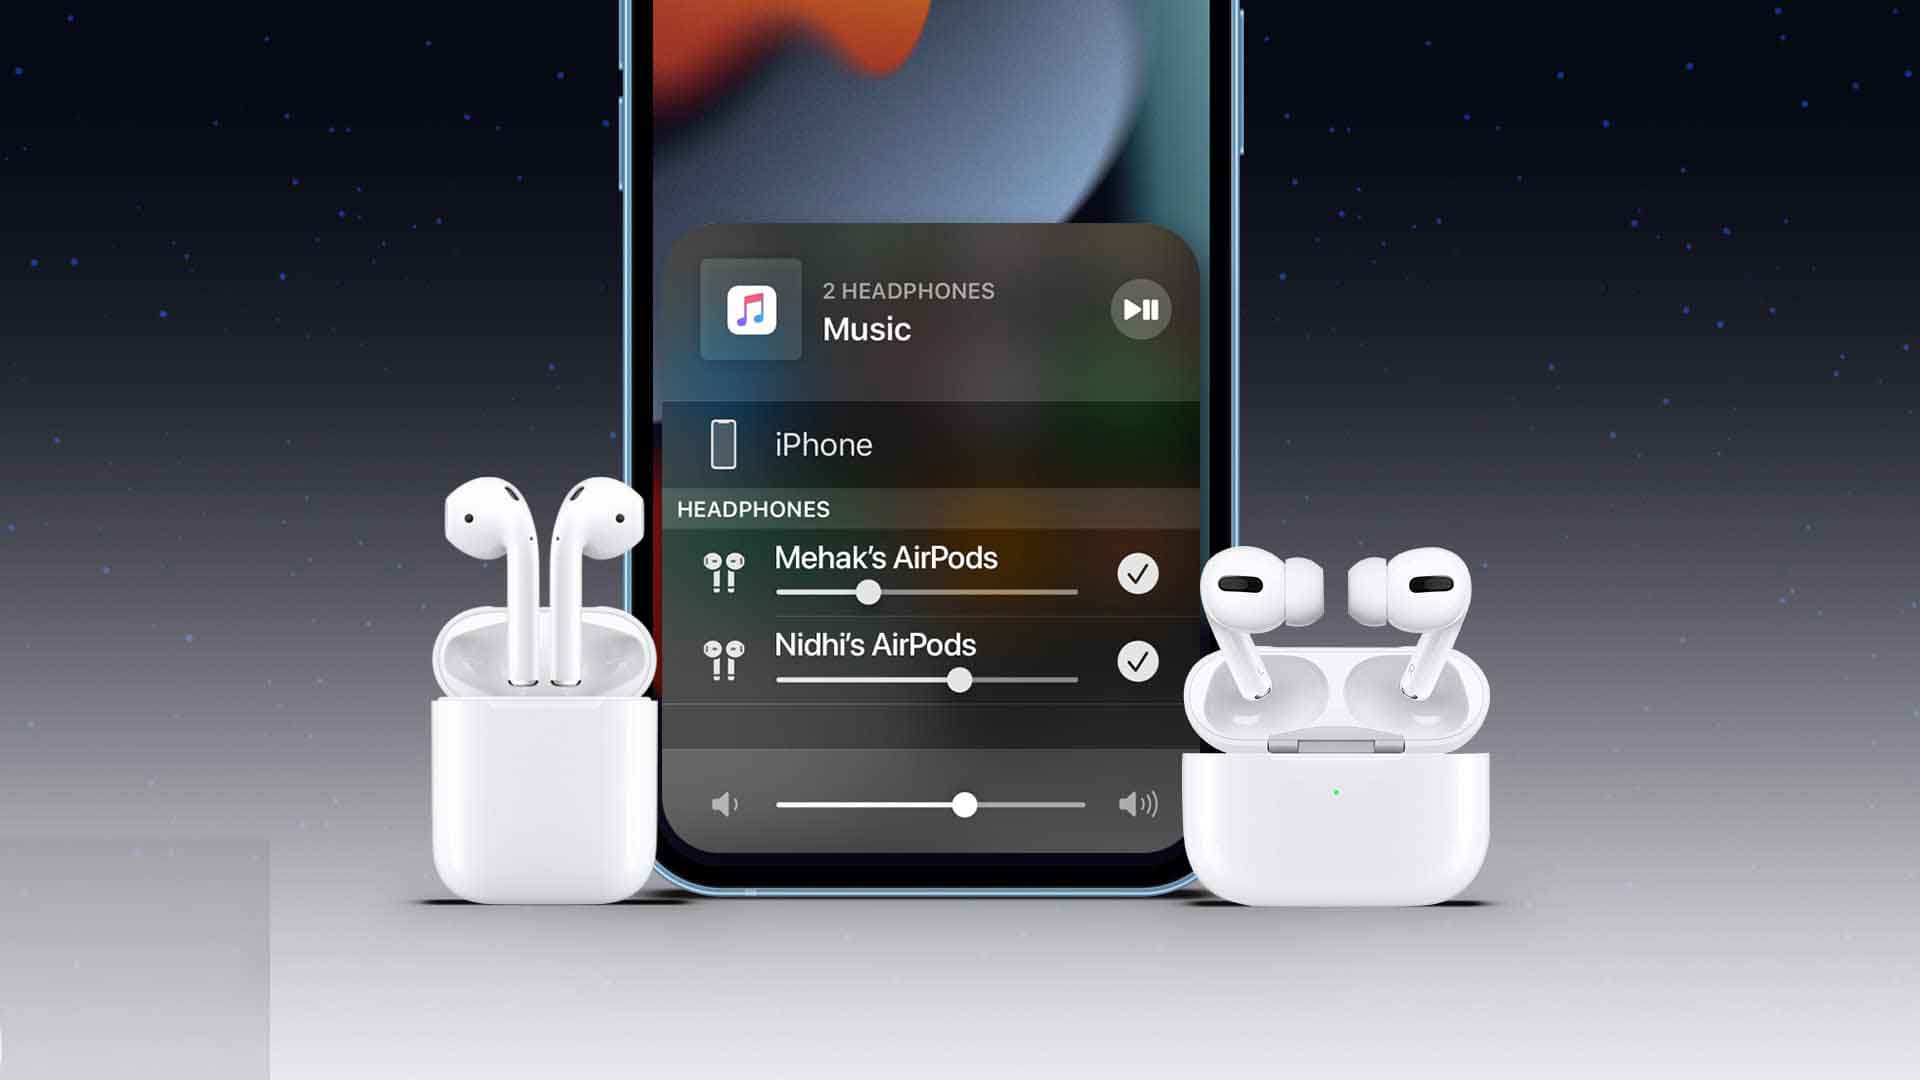 How to Connect Two Sets of AirPods to the Same iPhone